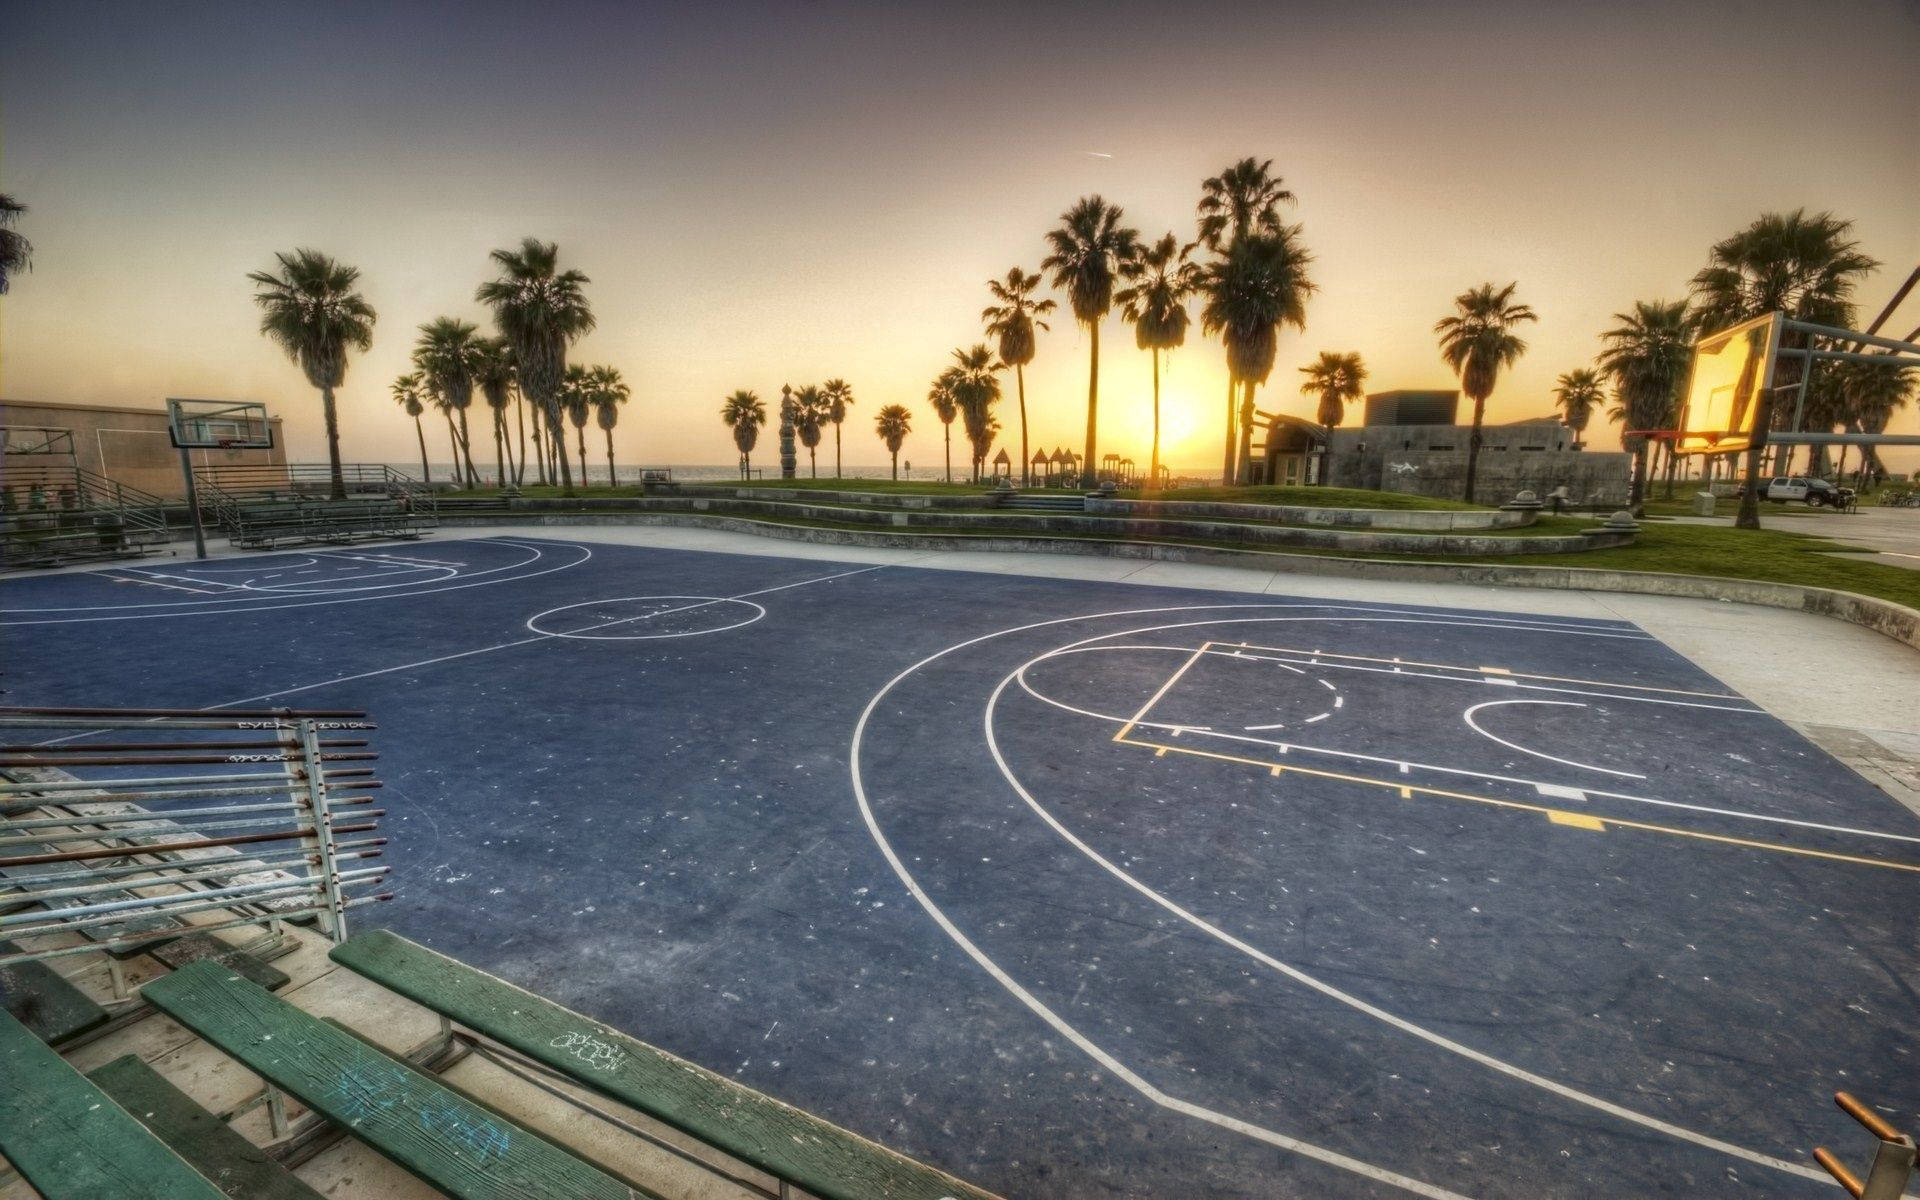 Gray Basketball Court In Los Angeles